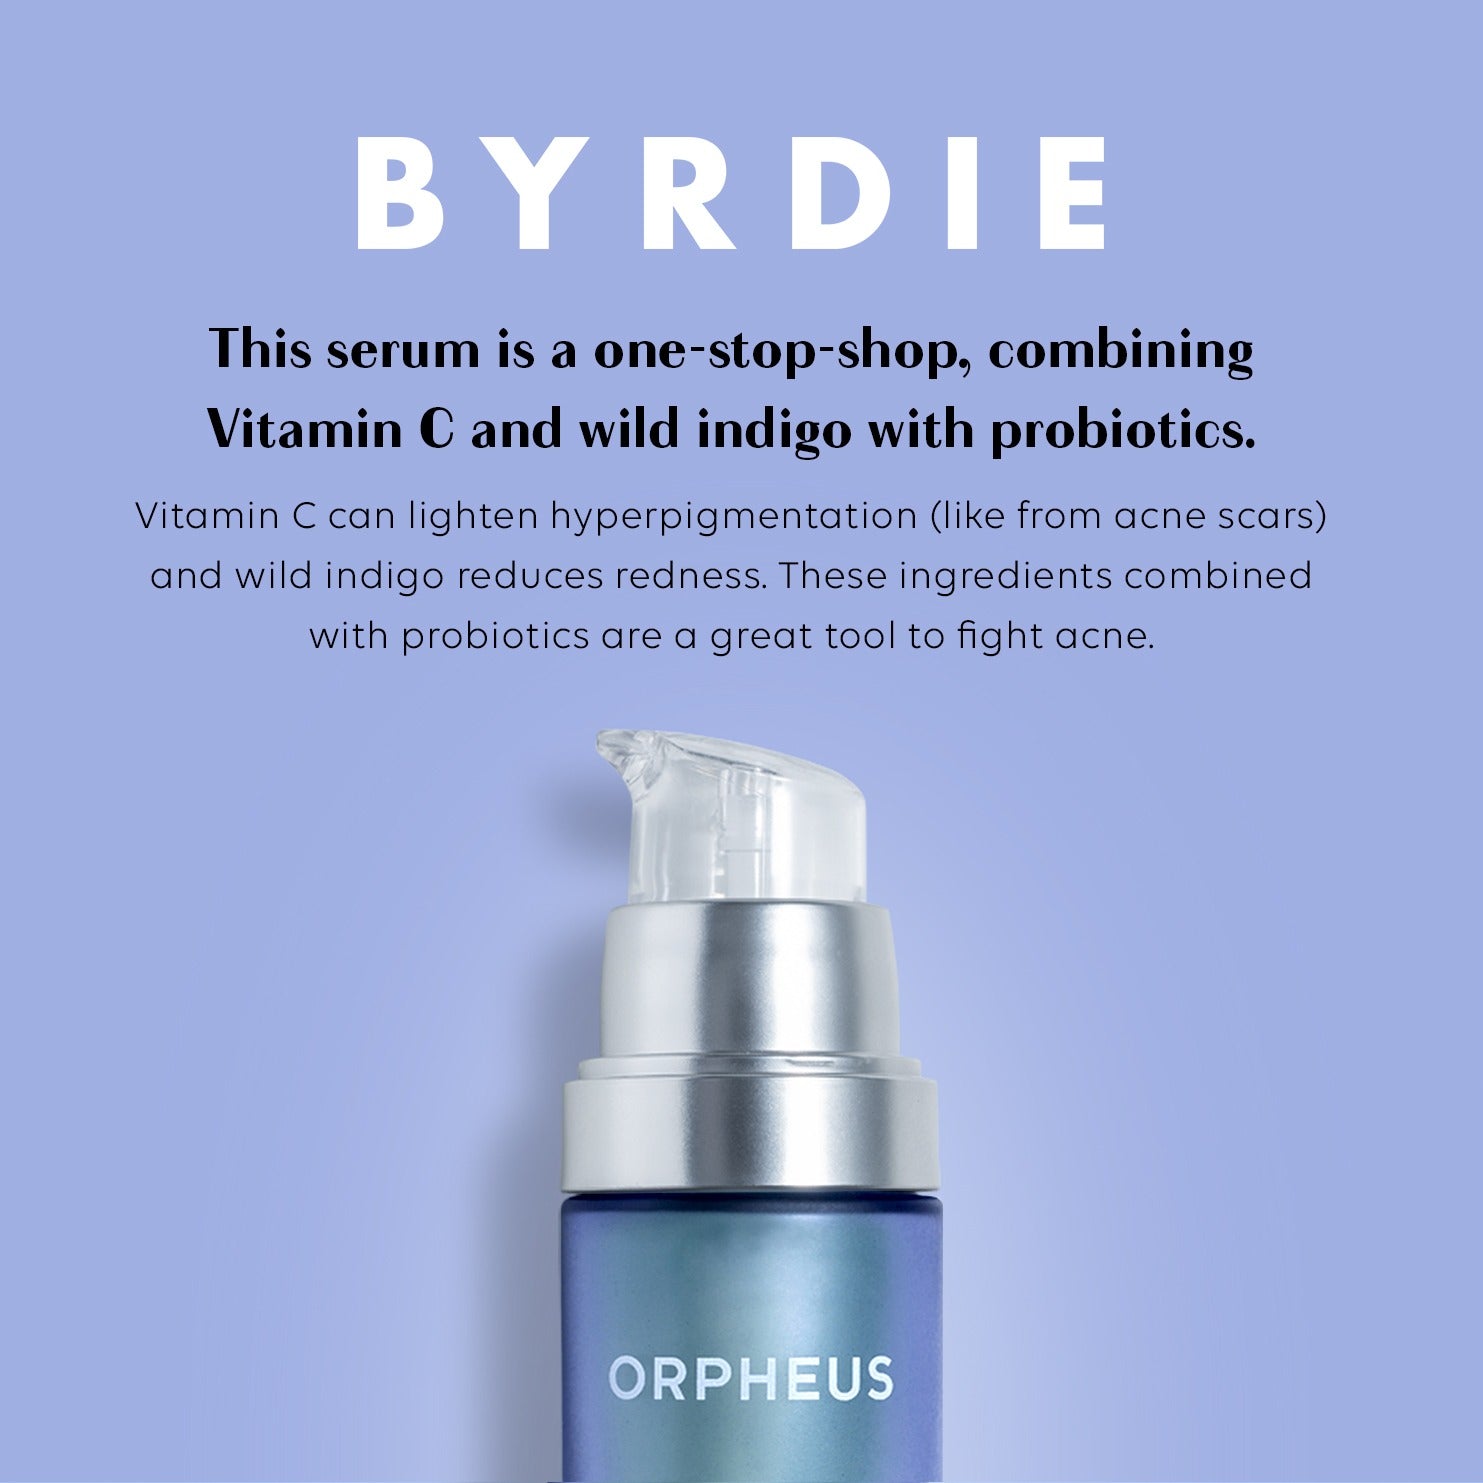 This serum is a one-stop-shop, combining Vitamin C and wild indigo with probiotics. Vitamin C can lighten hyperpigmentation (like from acne scars)﻿ and wild indigo reduces redness. 